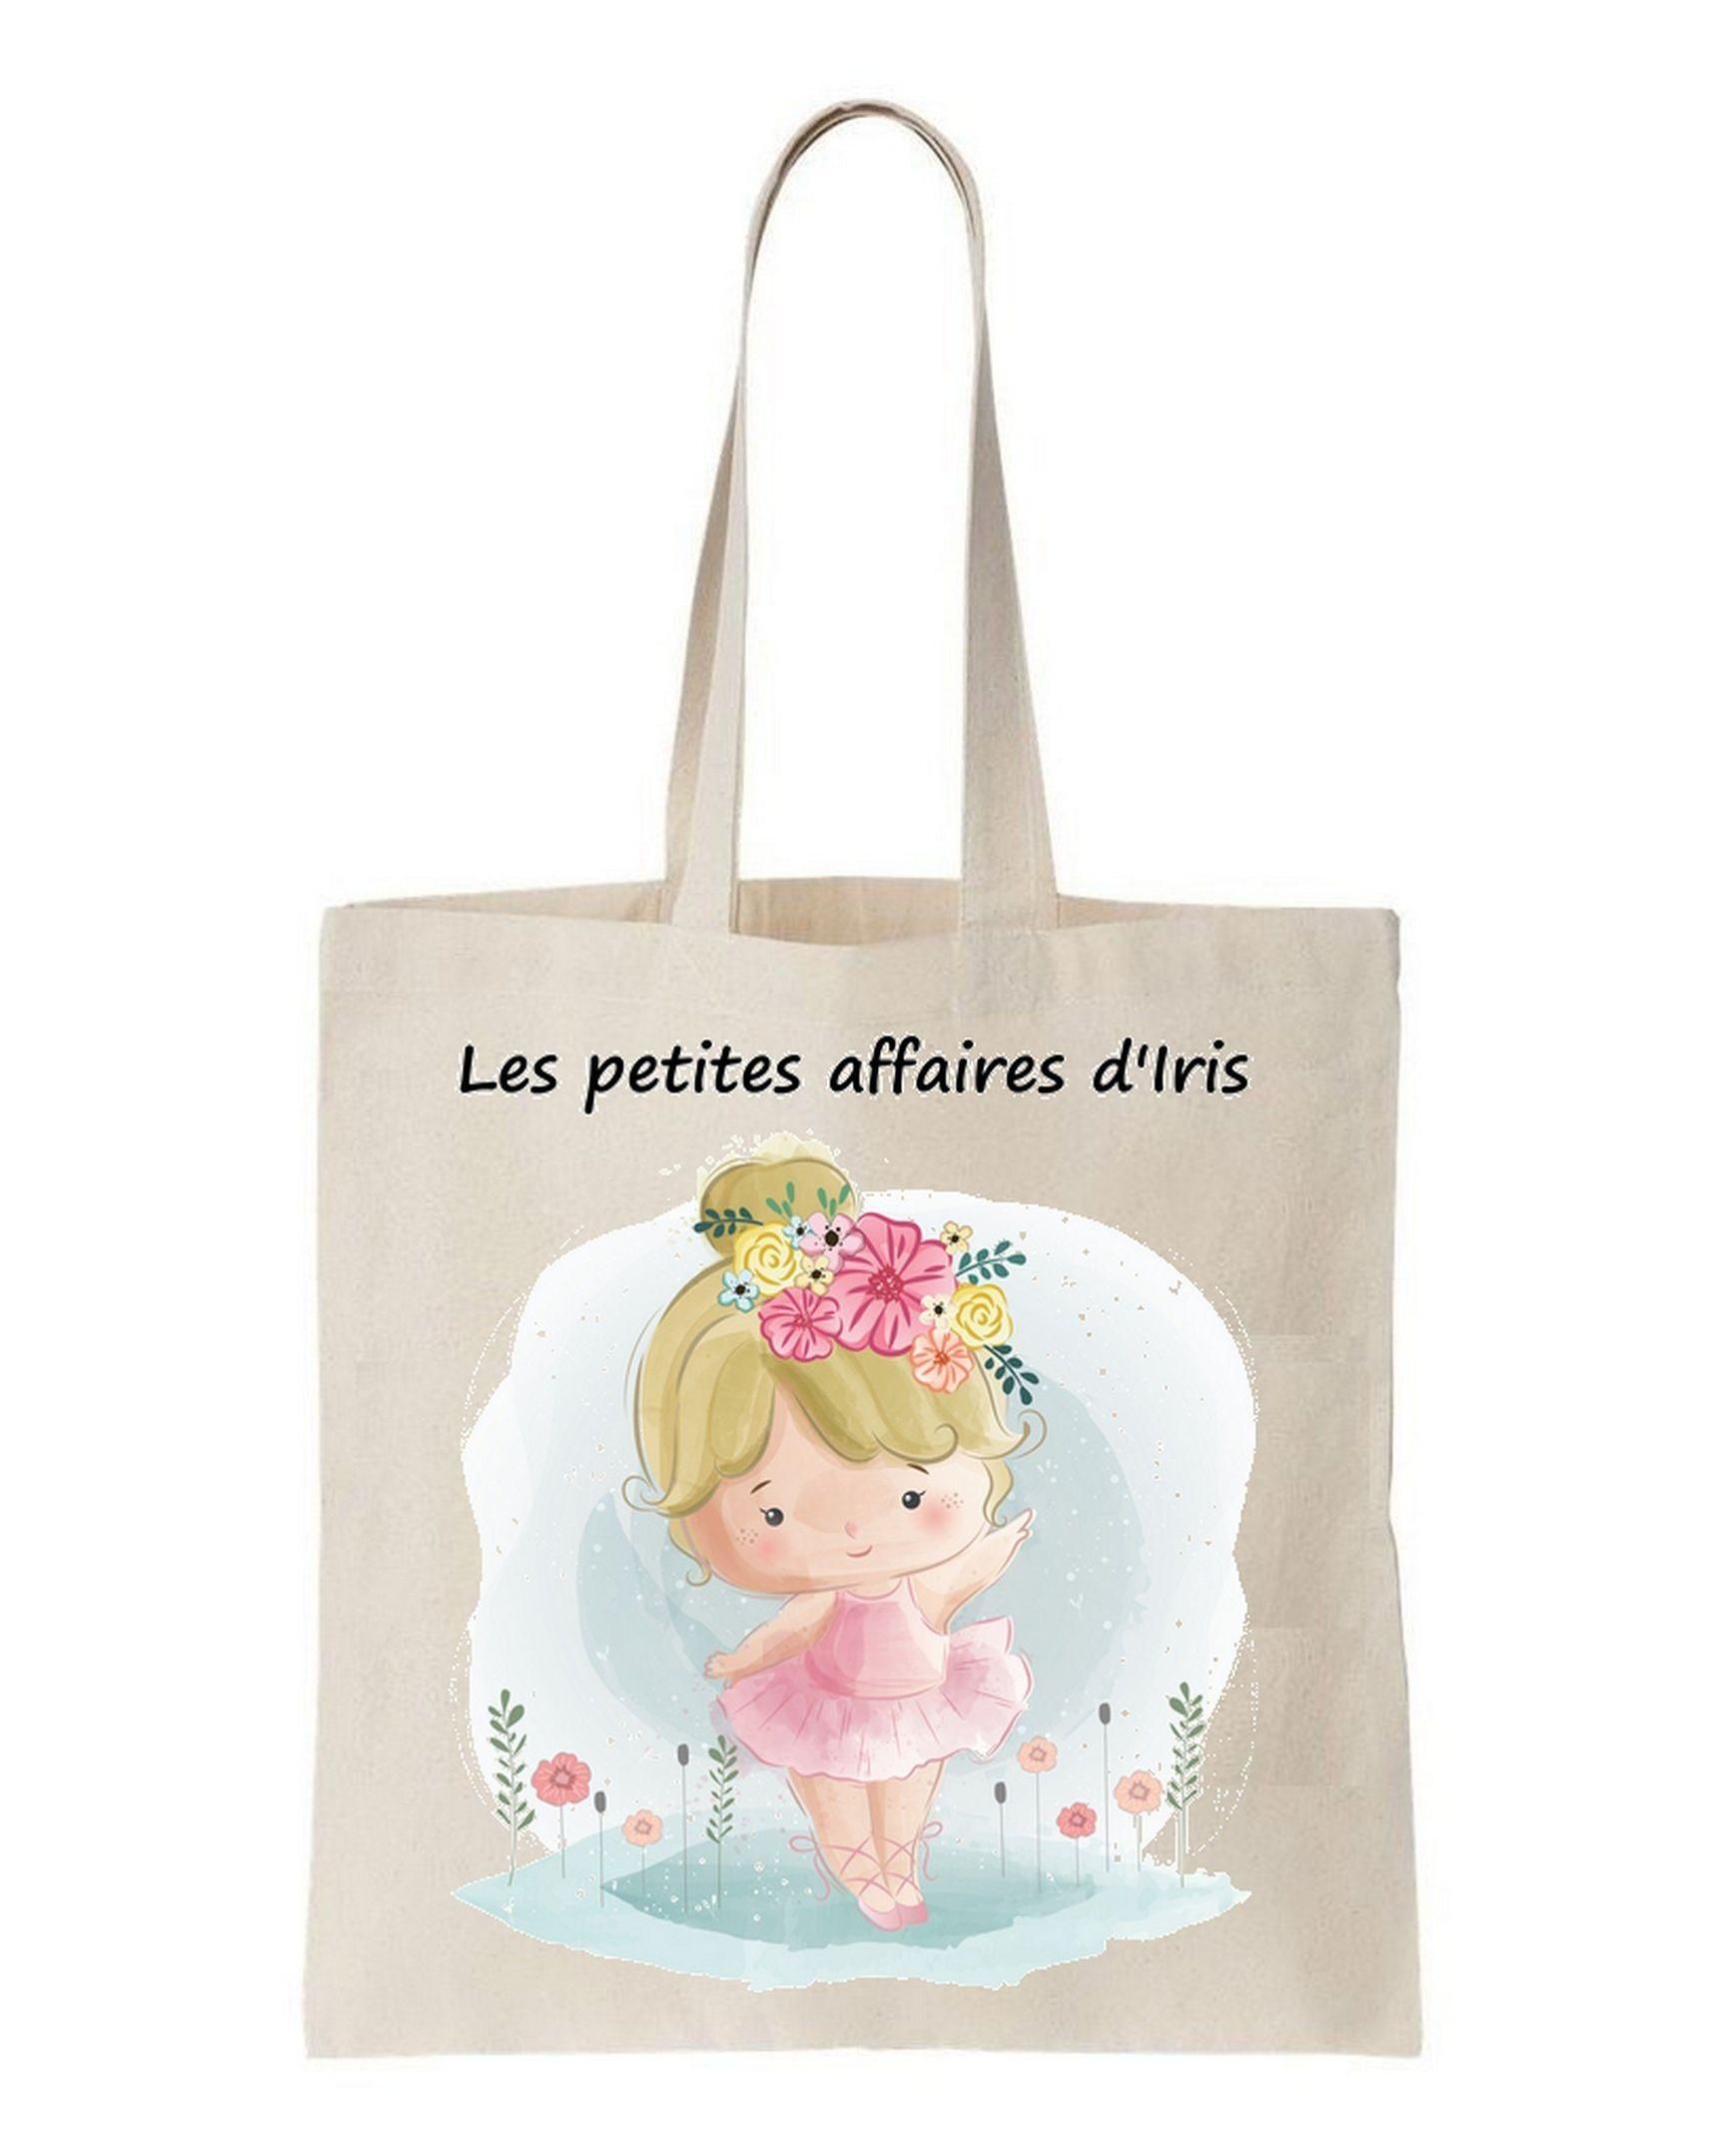 Cute Baby Girl With Flowers Printed Tote Bag Birthday Gift For Girls